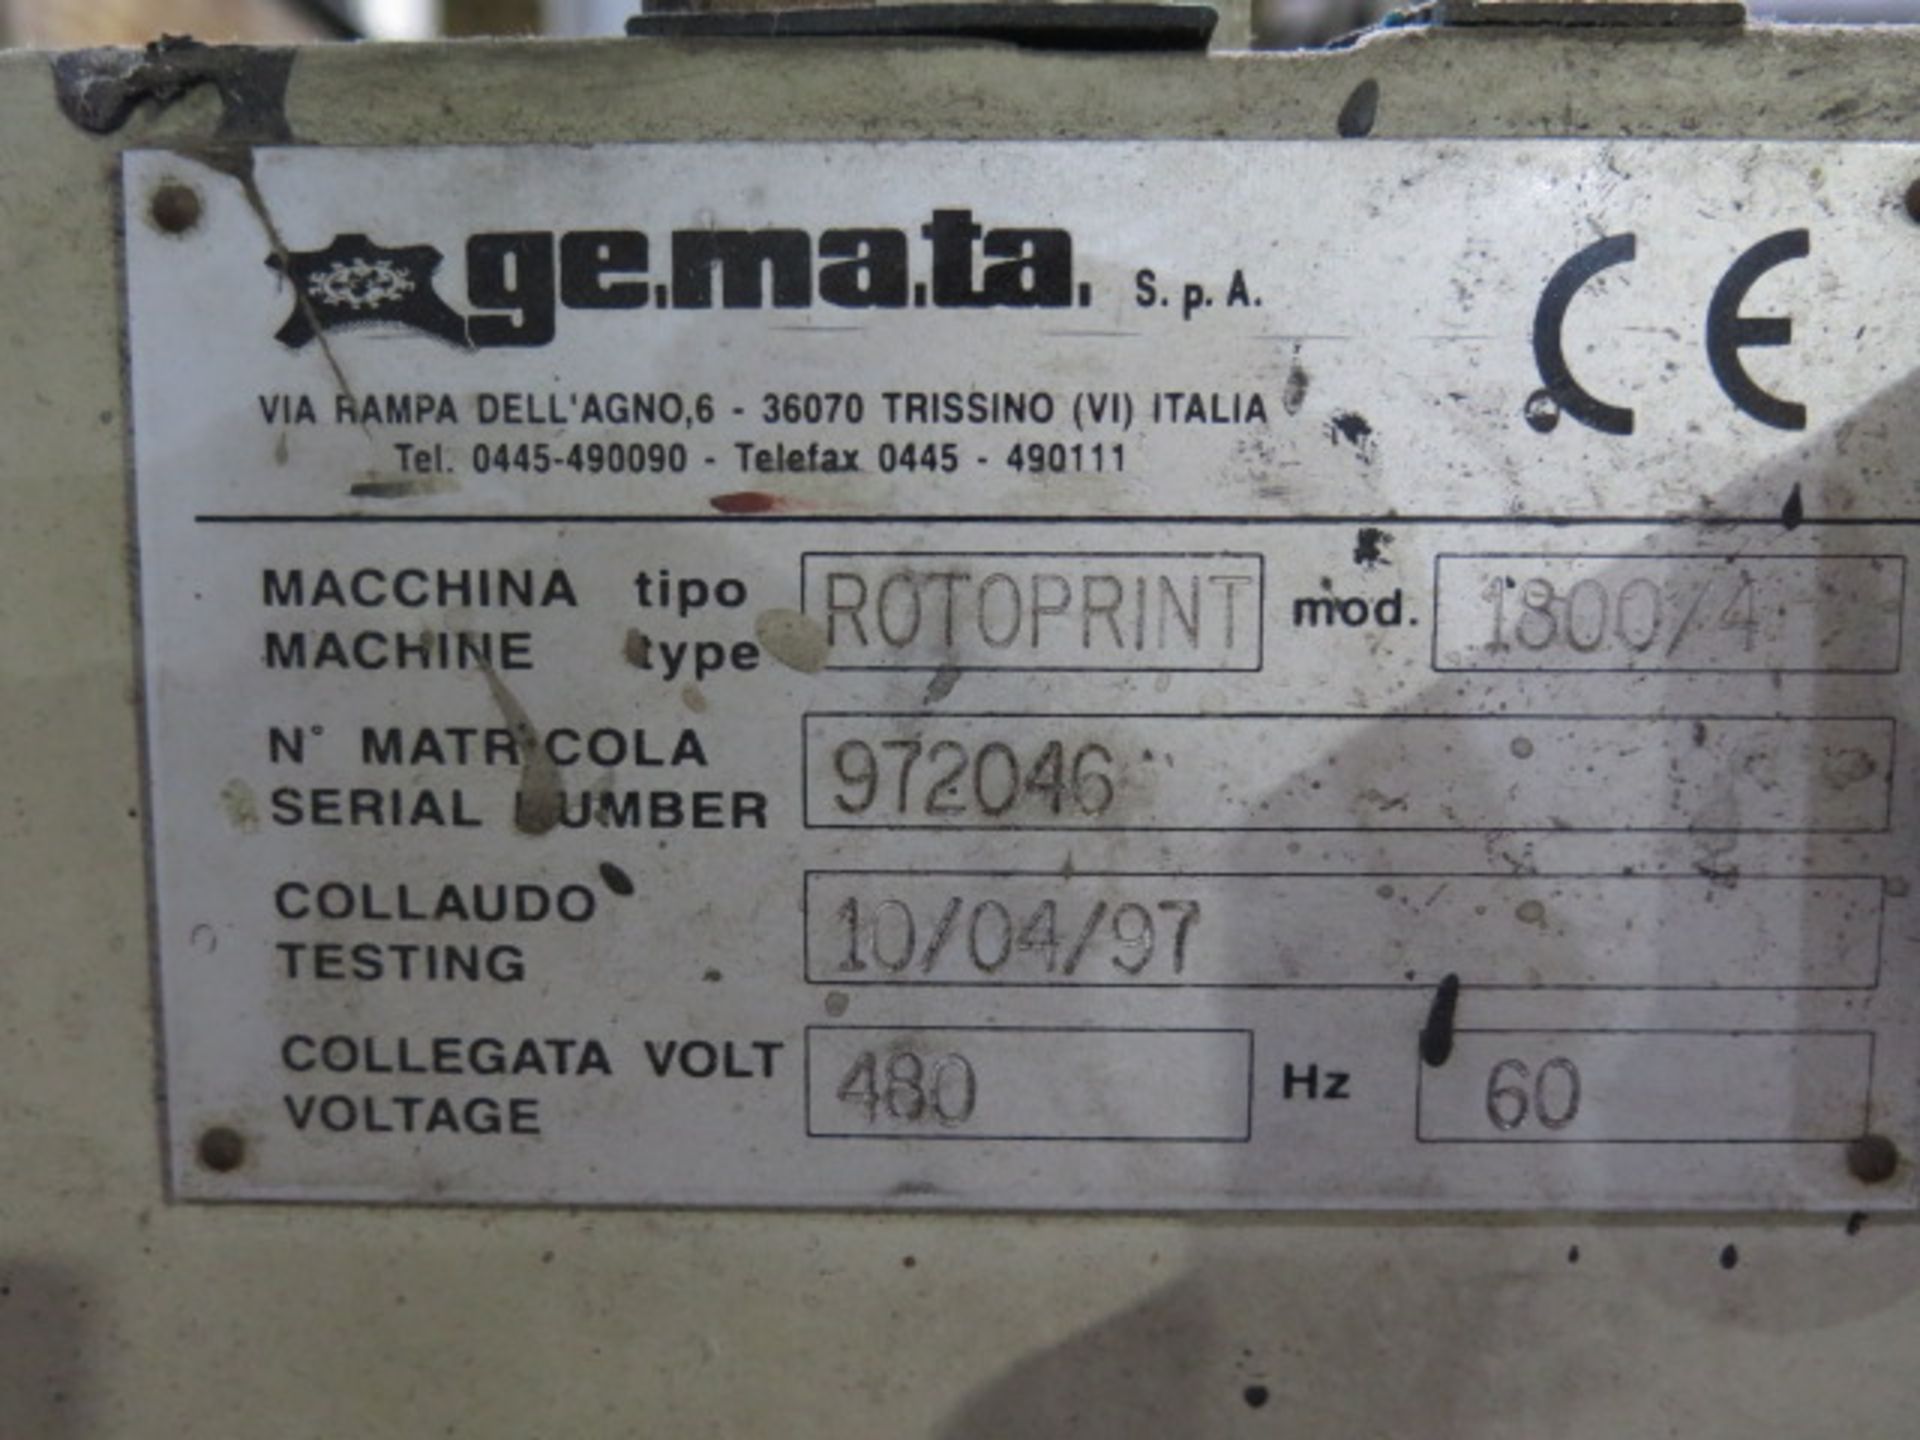 1997 Gemata “Rotoprint” 1800/4 75” Roller Coating Machine s/n 972046 (SOLD AS-IS - NO WARRANTY) - Image 14 of 14